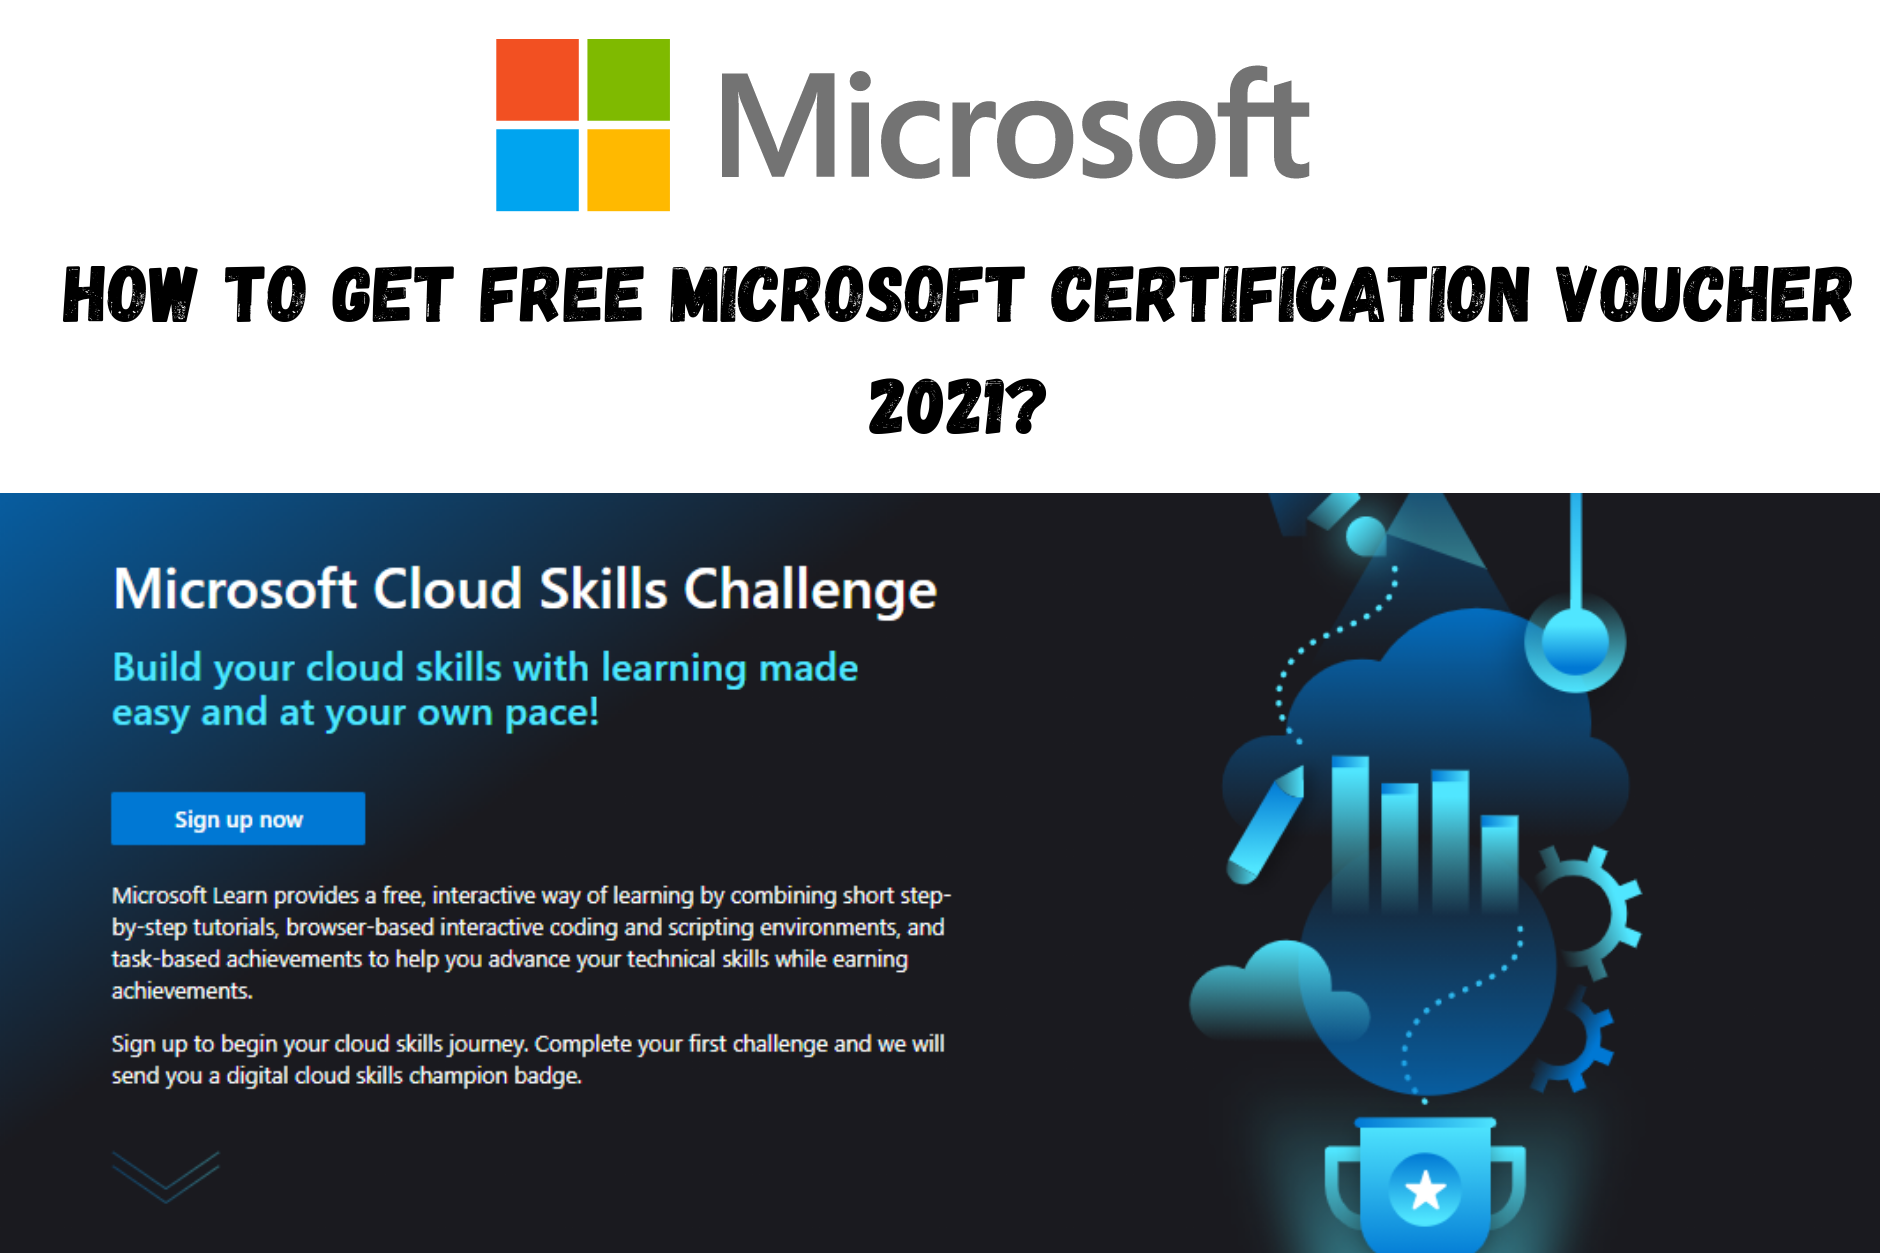 How to get free Microsoft certification Voucher 2021?